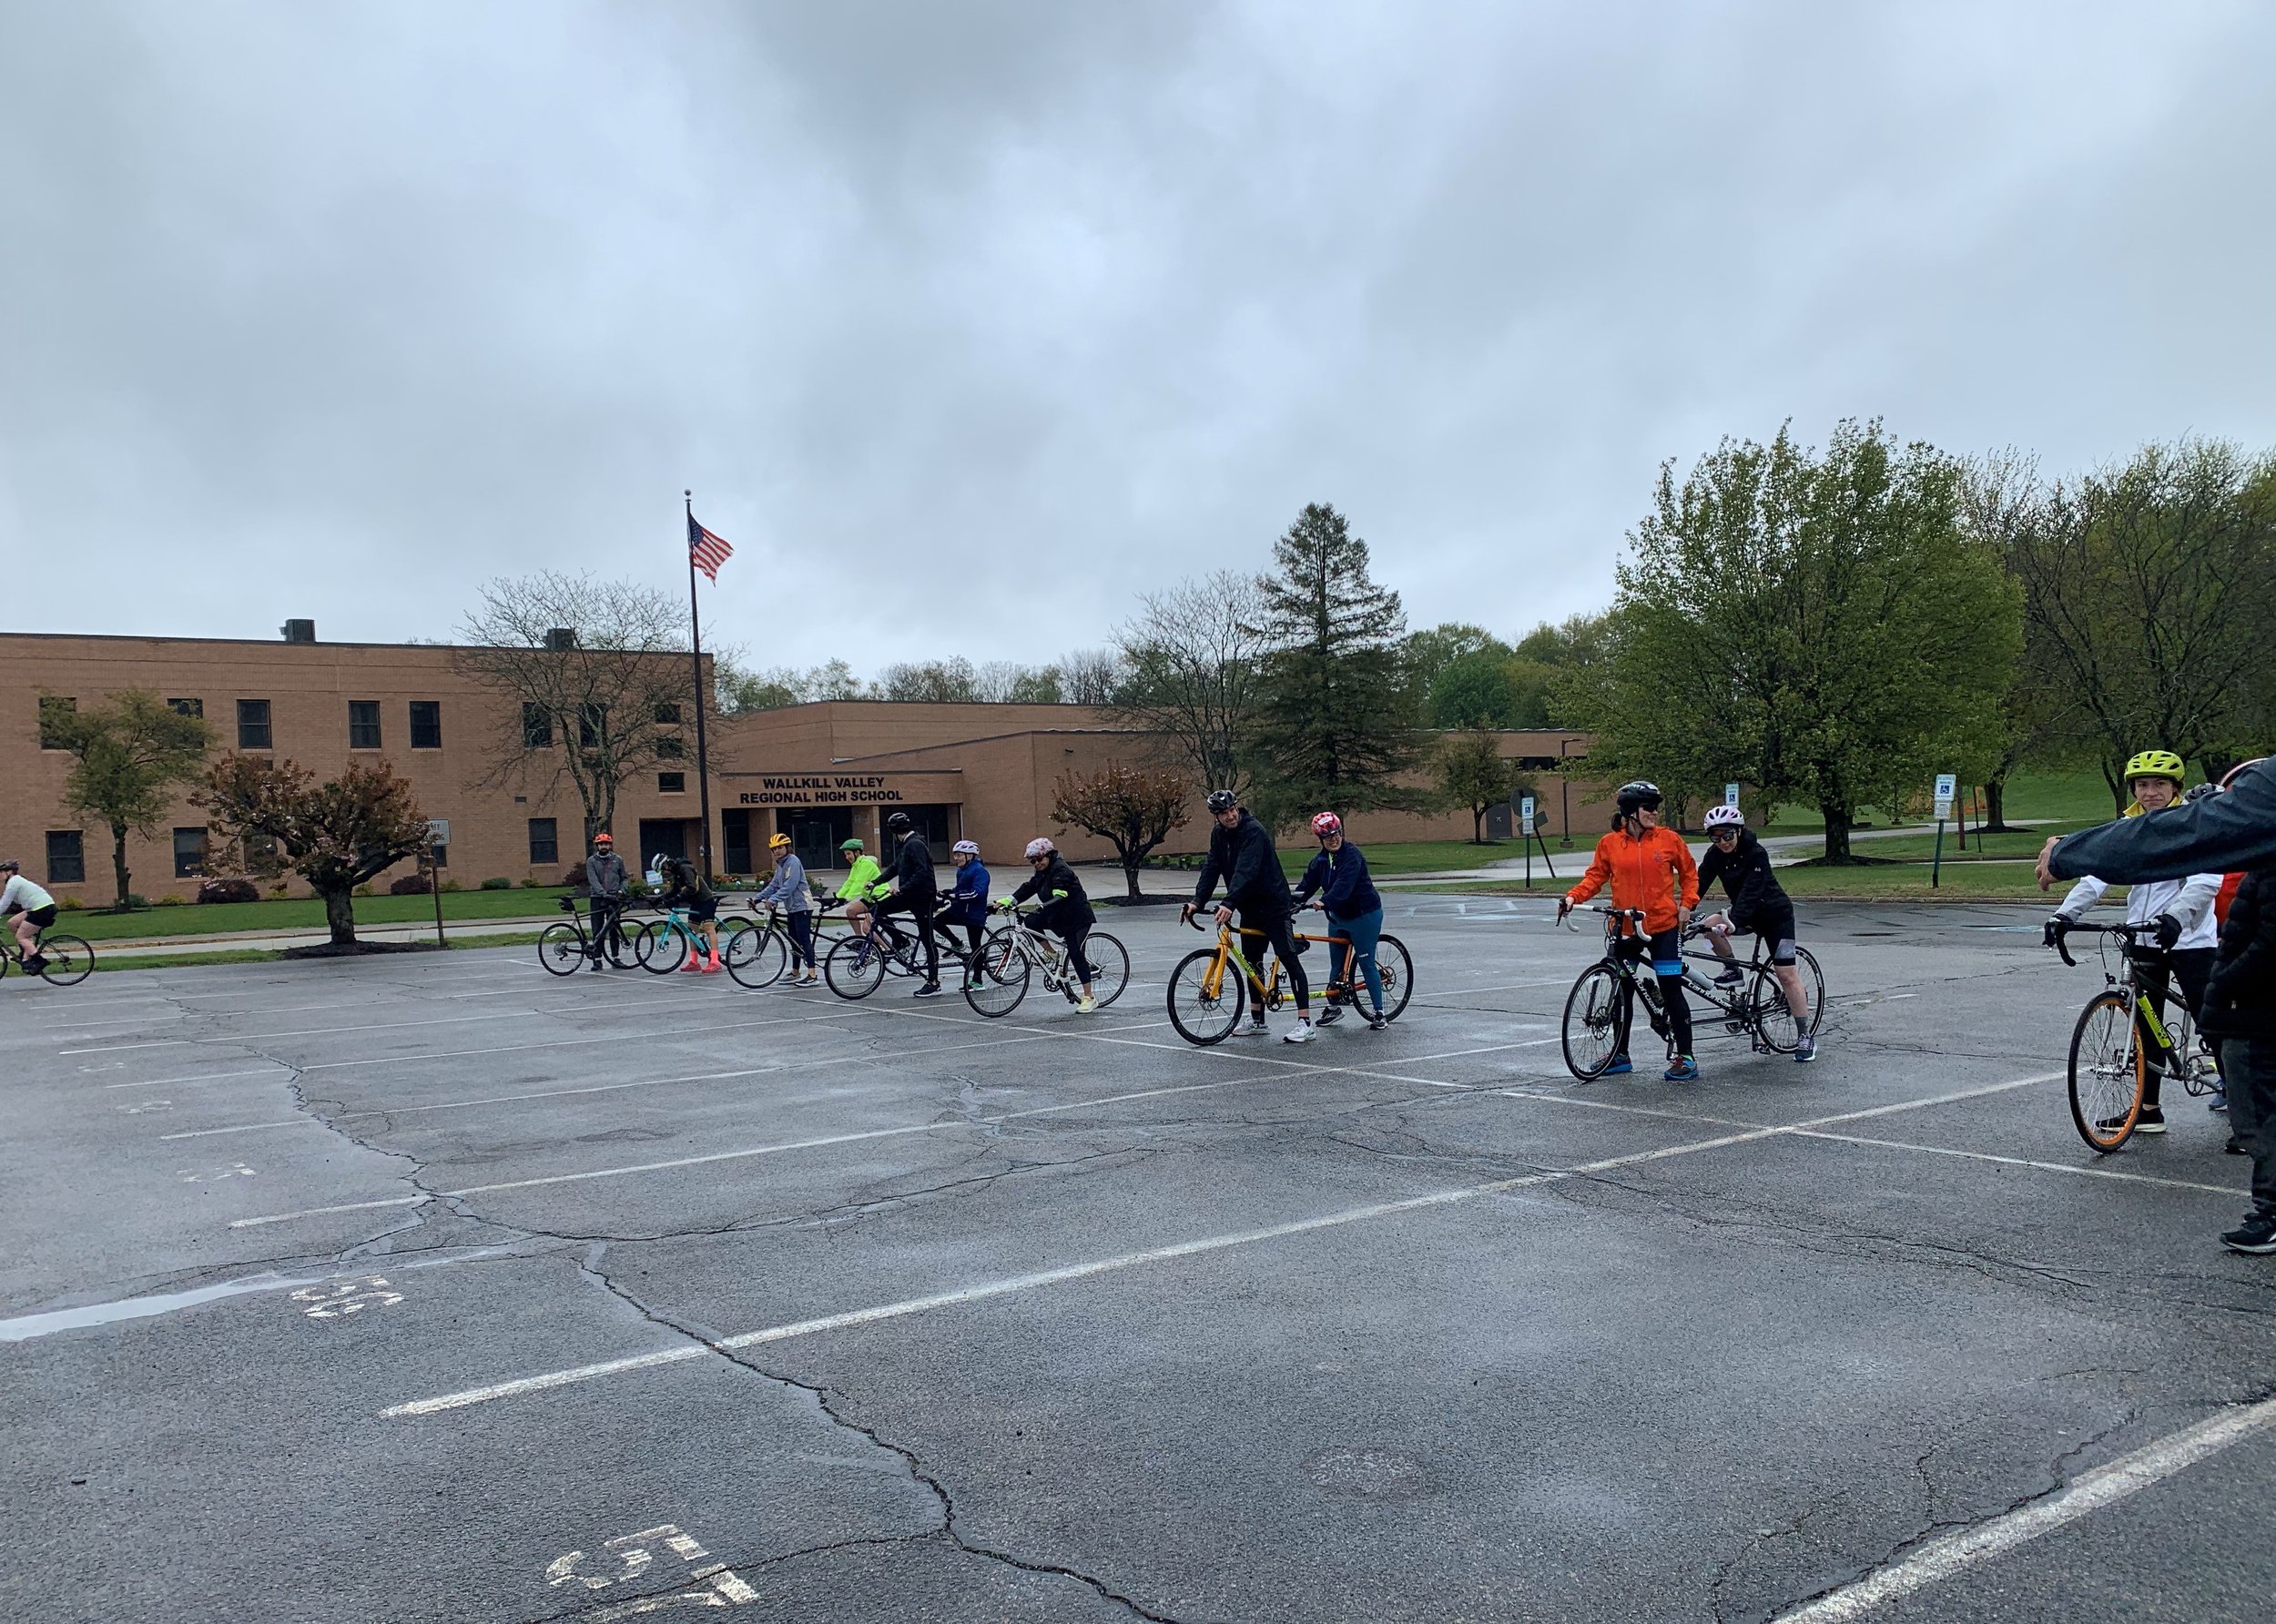  Achilles athletes practicing riding tandem bicycles  